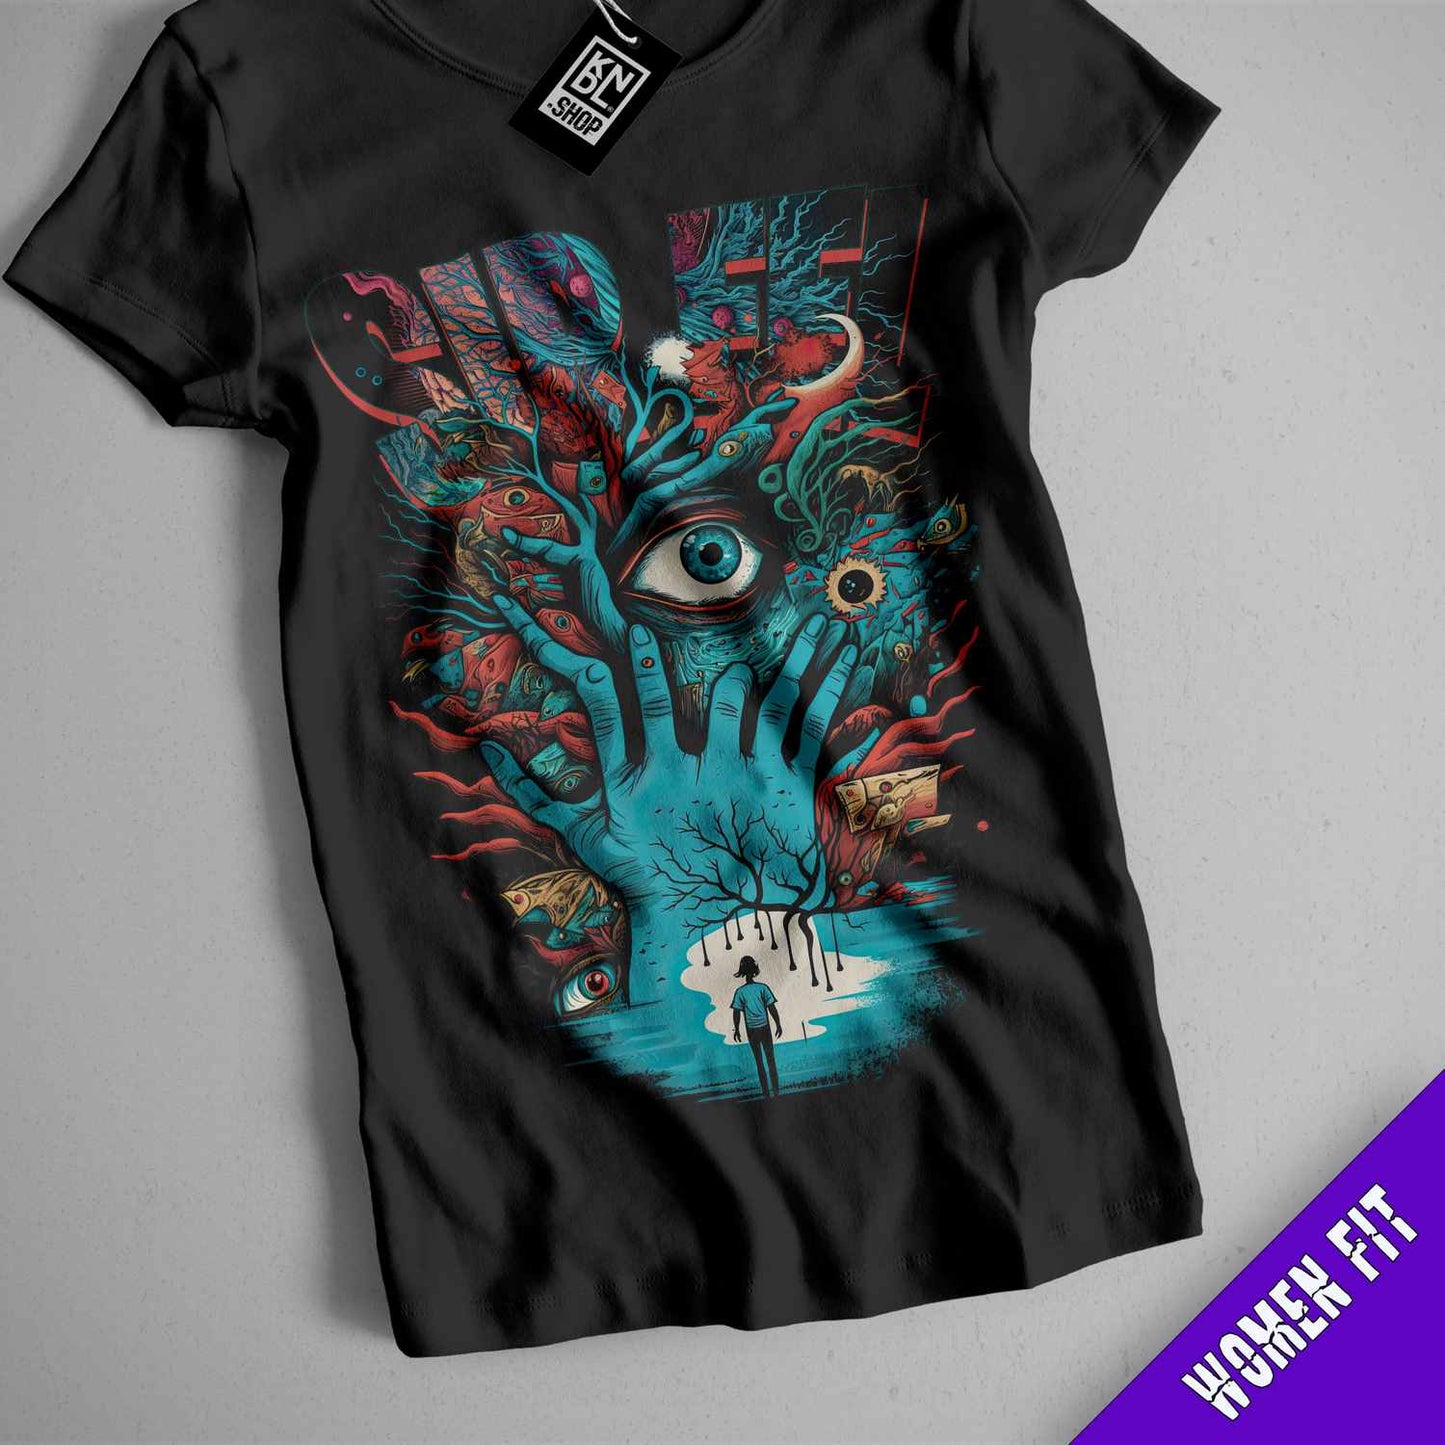 a t - shirt with an image of a hand holding a human eye